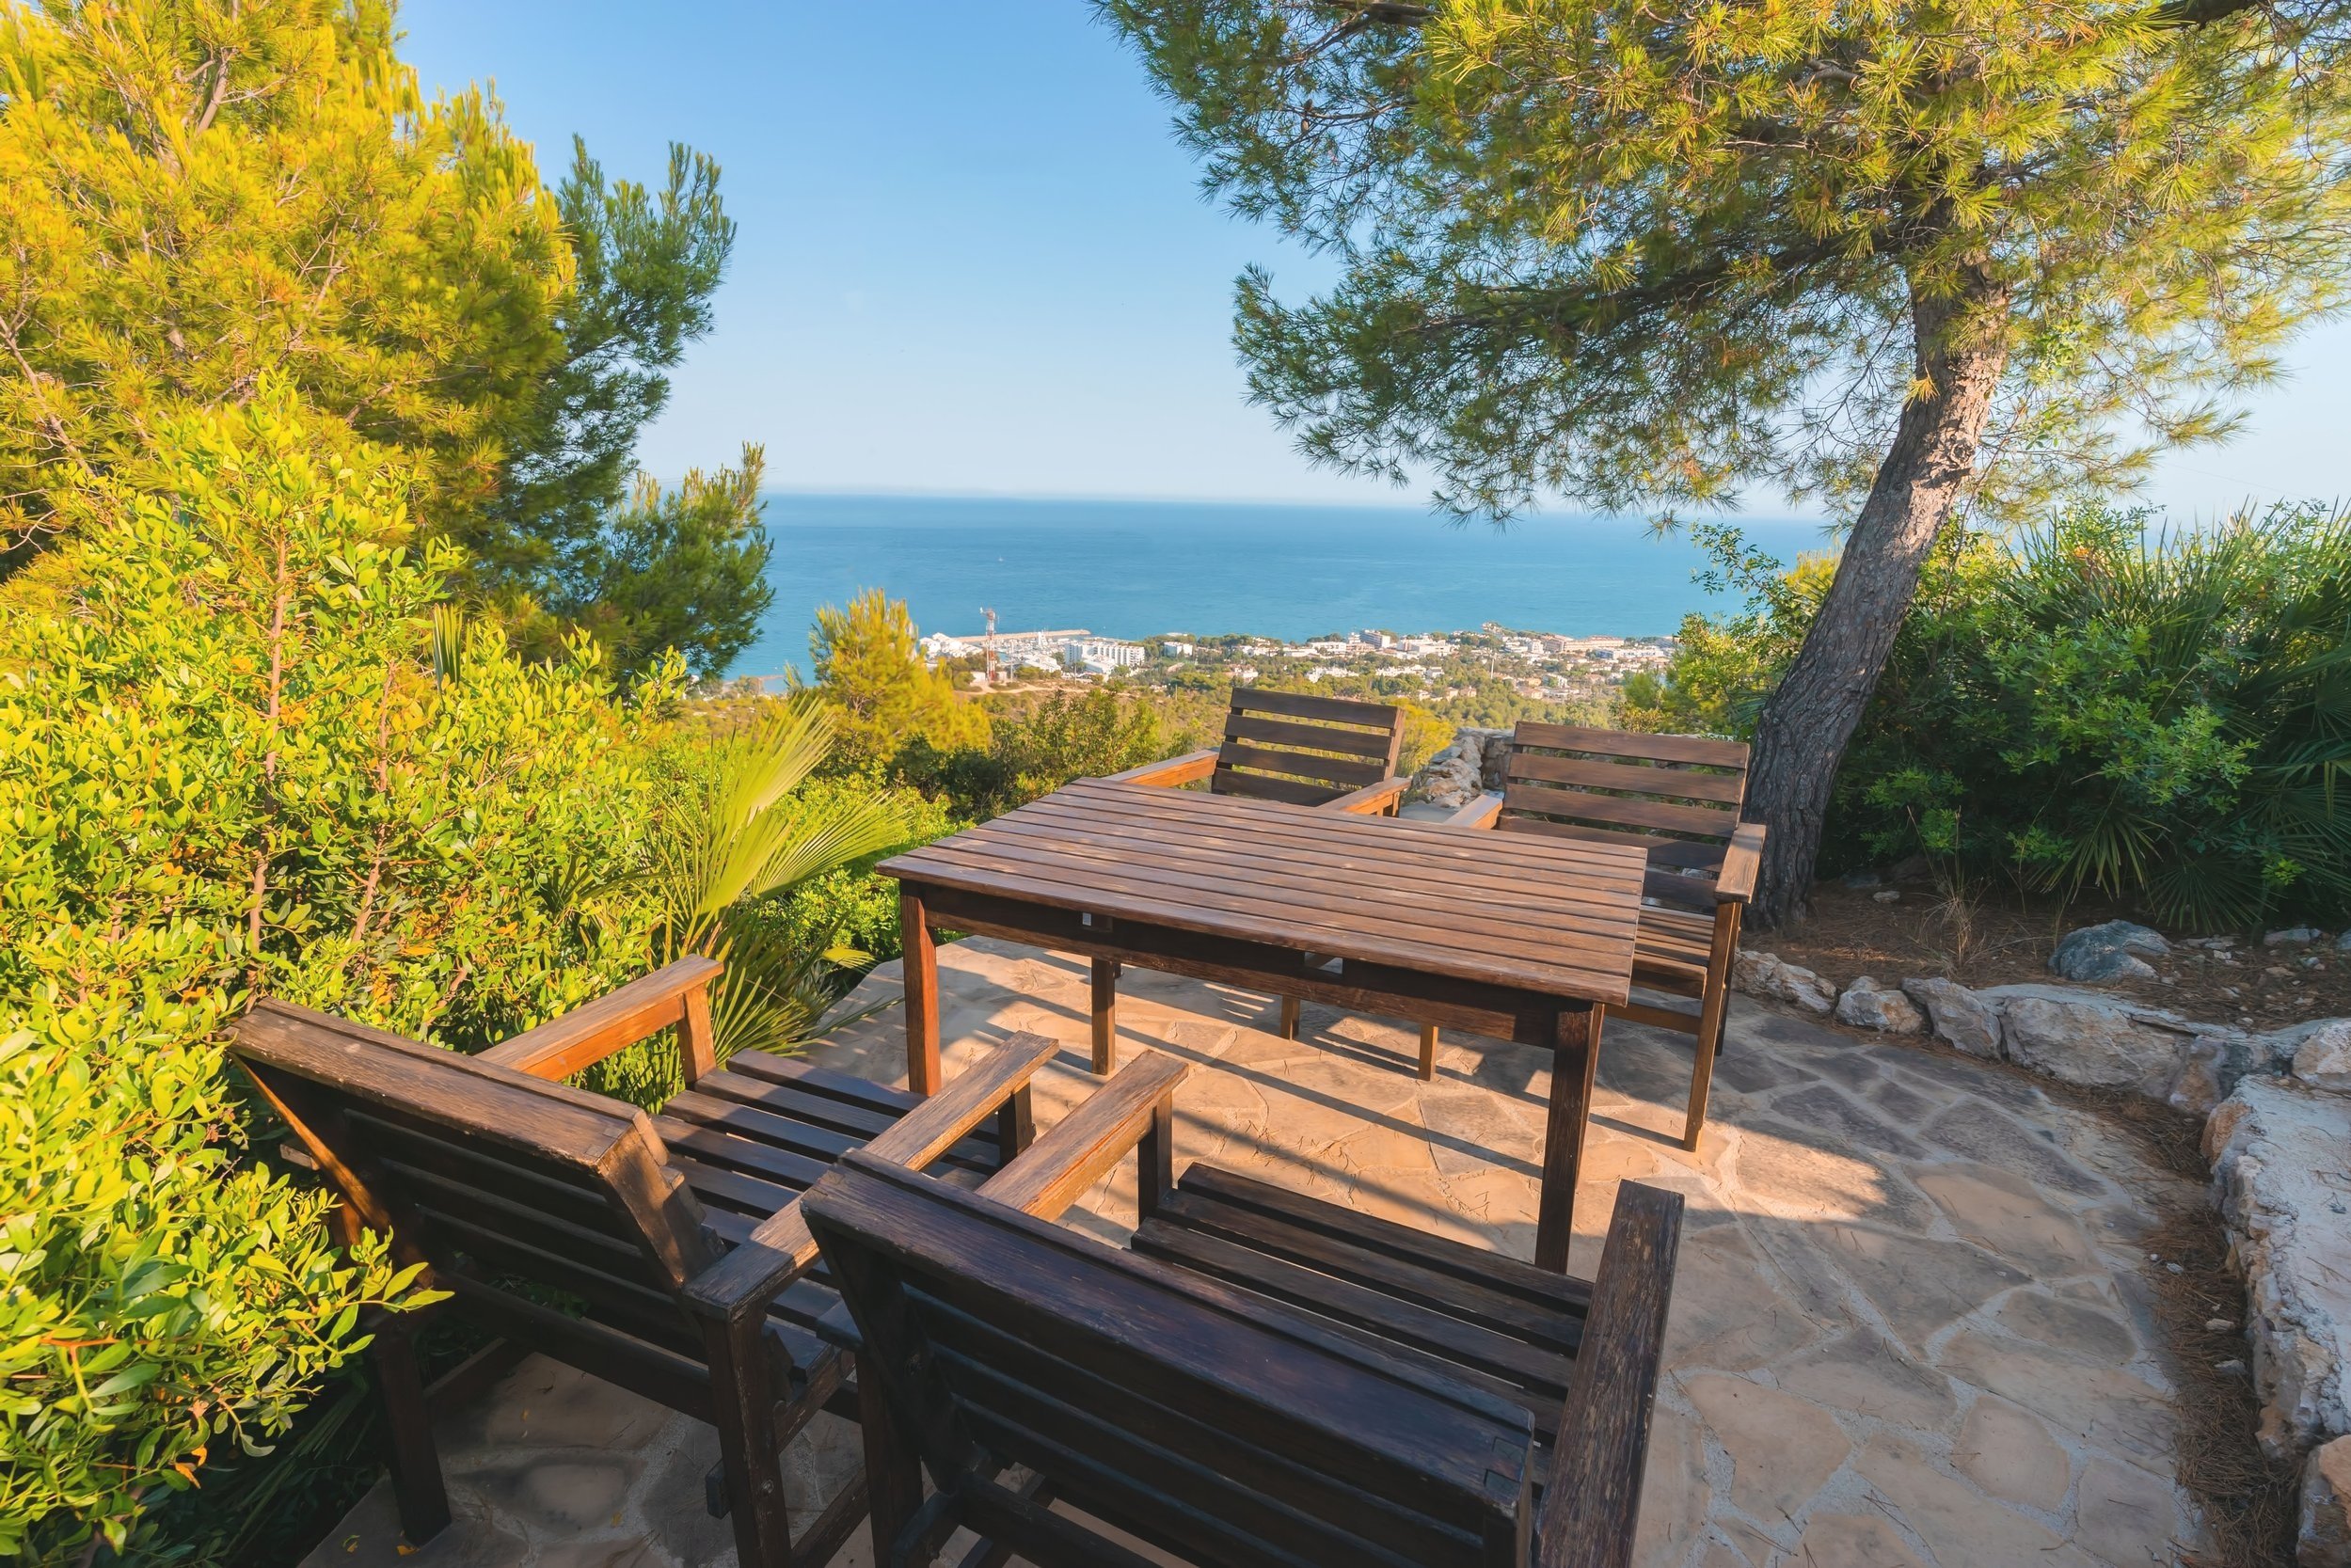 Breizas Nature Terrace: Scenic ocean view with table and chairs surrounded by greenery